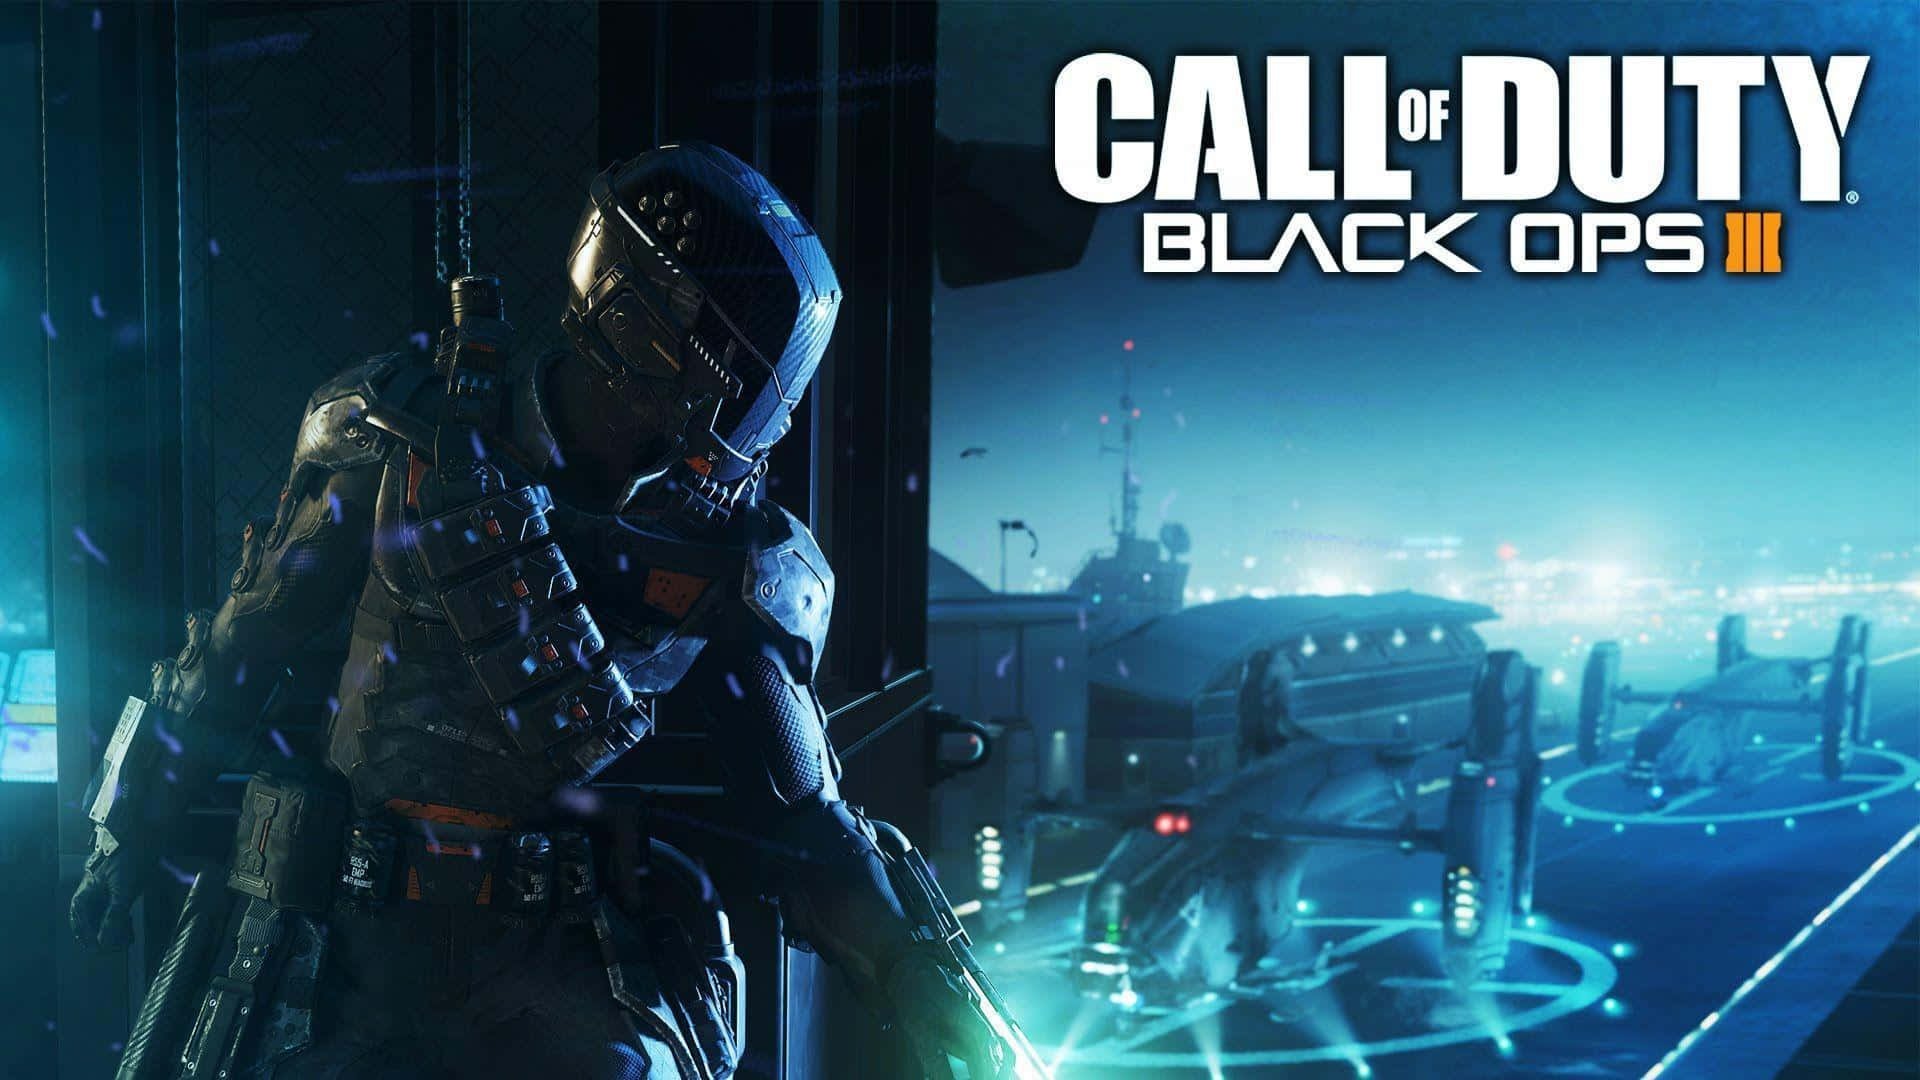 "Be Prepared to Face Unimaginable Futuristic Threats in Call of Duty Black Ops III" Wallpaper